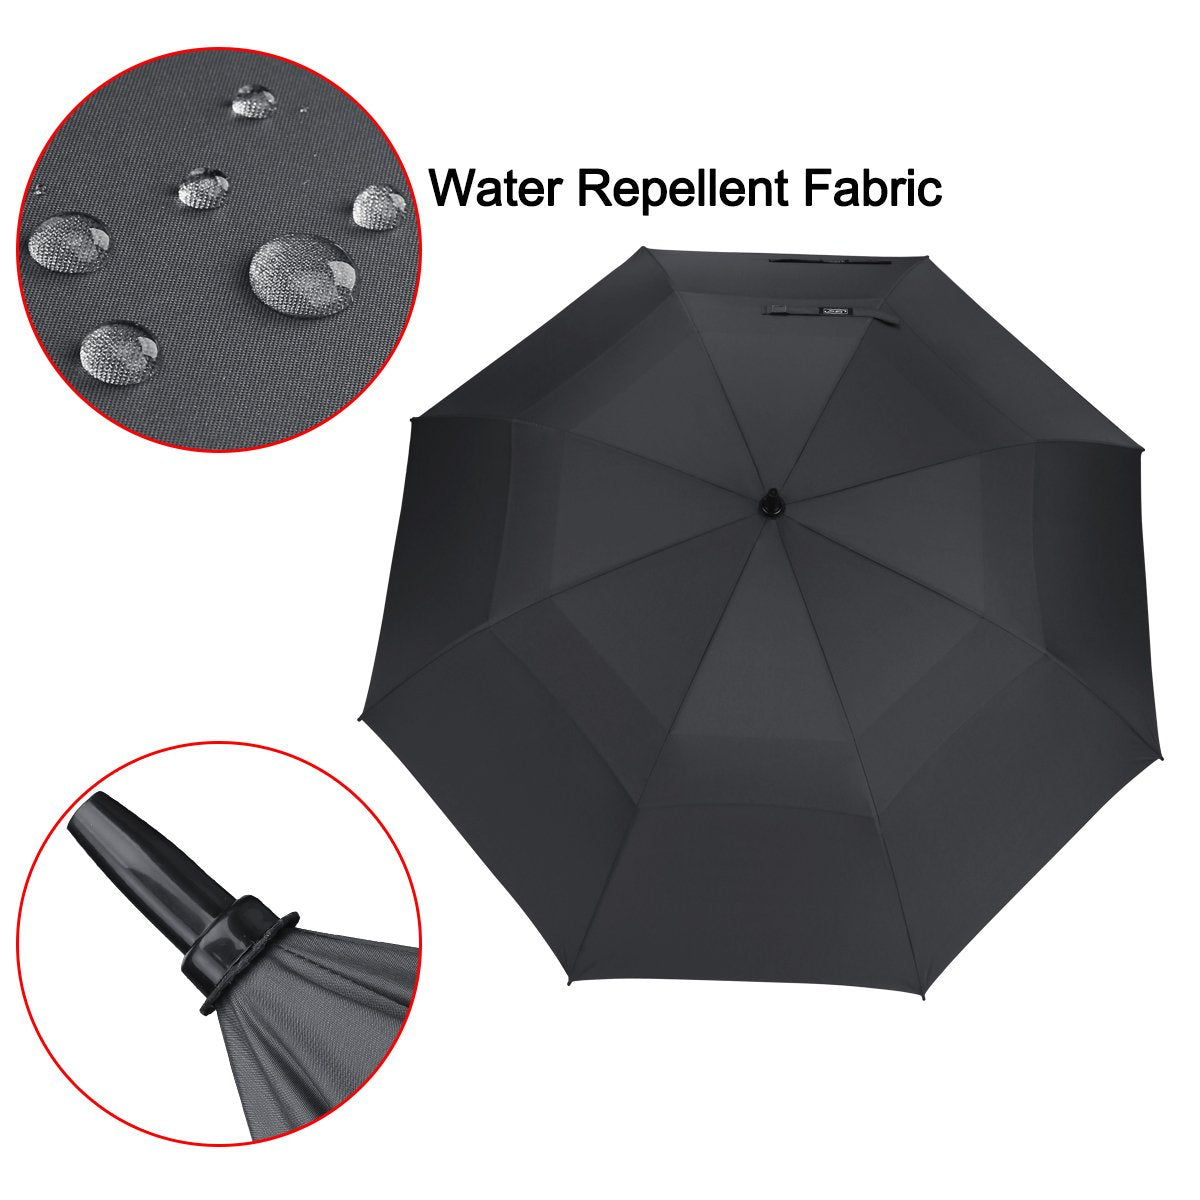 G4Free 47 Inch Automatic Open Golf Umbrella Extra Large Oversize Double Canopy Vented Windproof Waterproof Stick Umbrellas (Black)